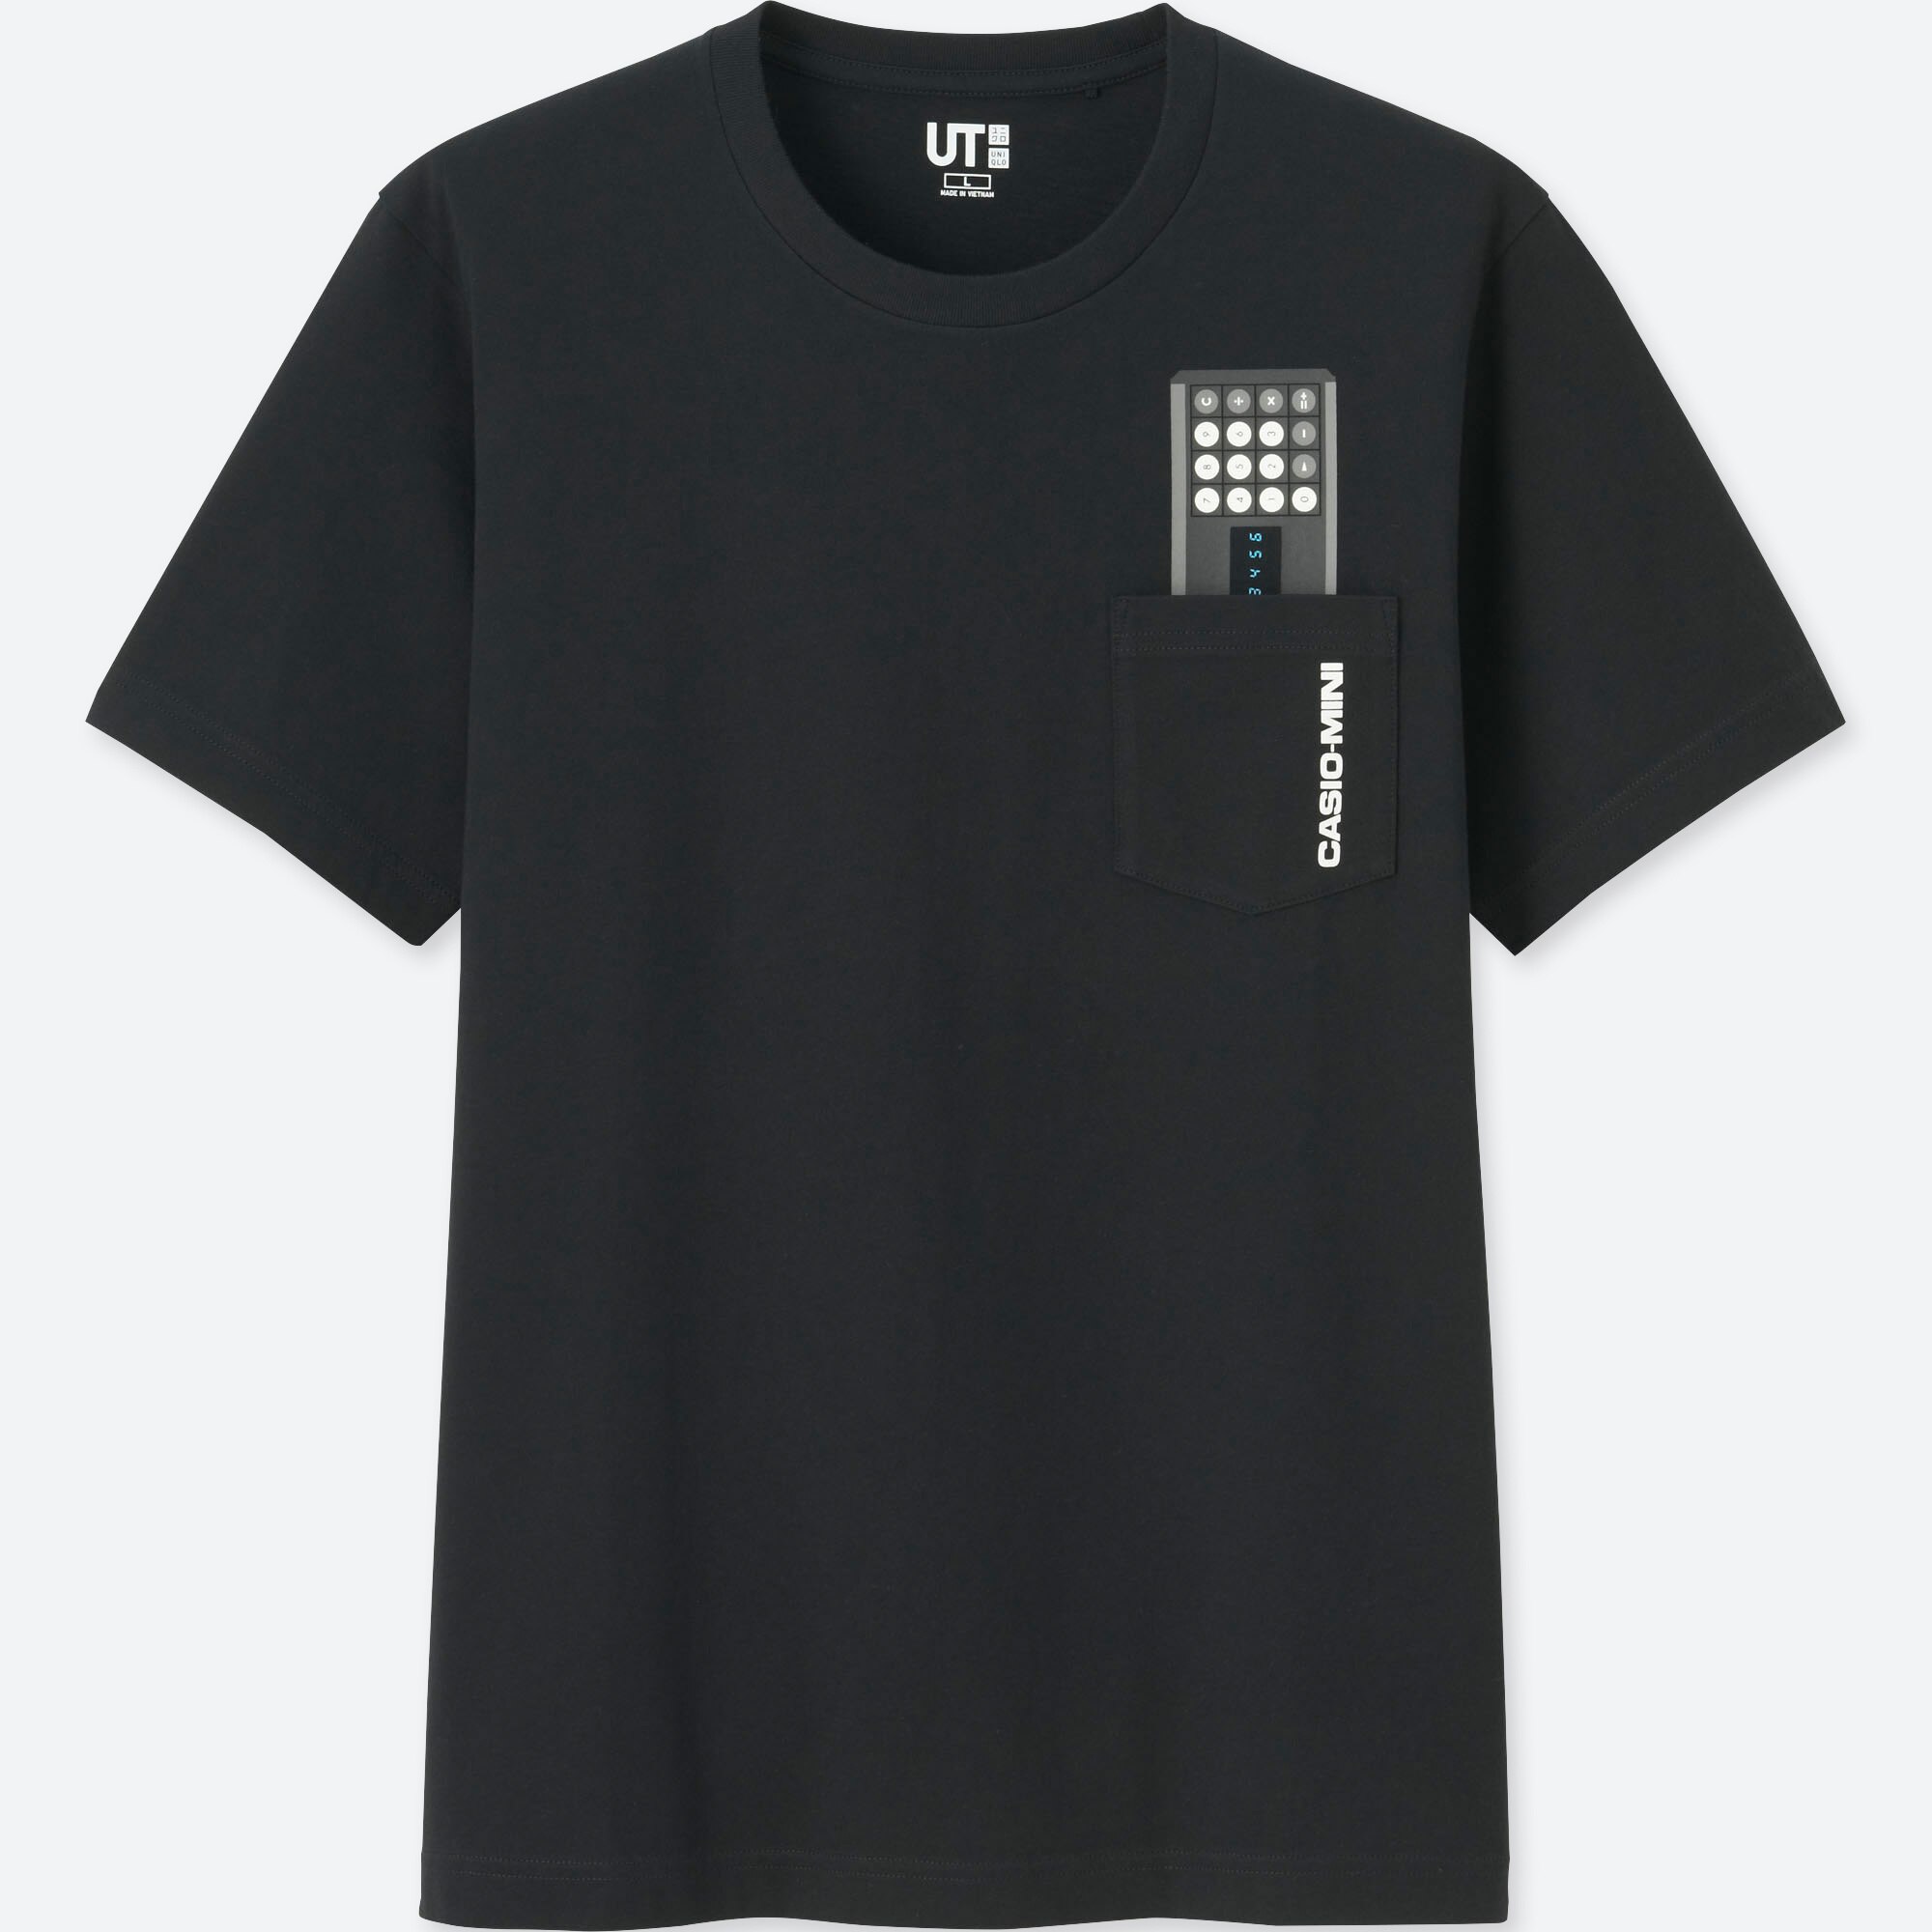 THE BRANDS SHORT-SLEEVE GRAPHIC T-SHIRT (CASIO) | UNIQLO US